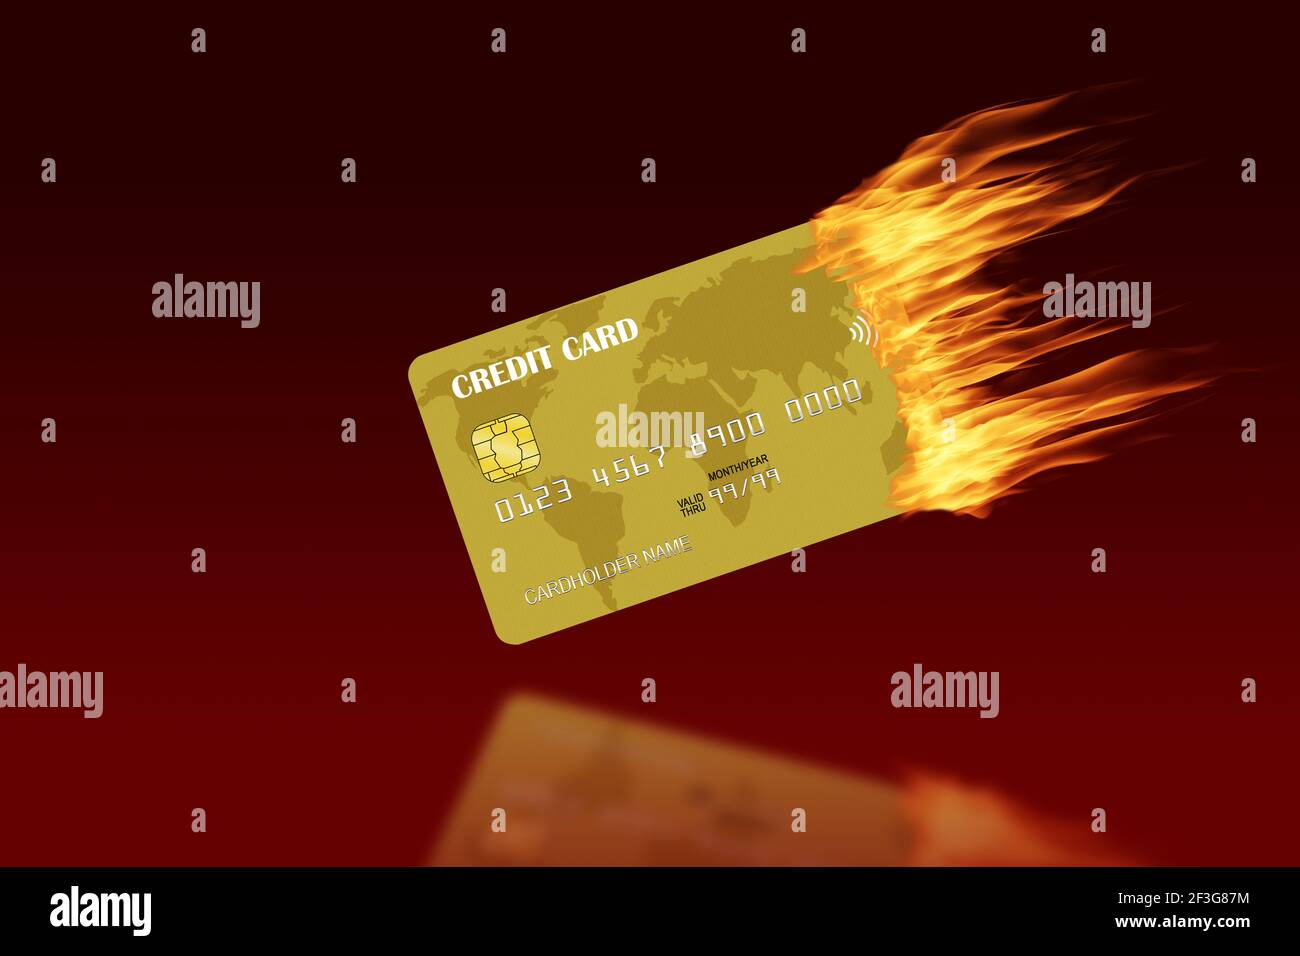 Golden credit card burning with trailing fire and copy space against red background. Concept of credit trouble, financial crisis, credit warning, debt Stock Photo